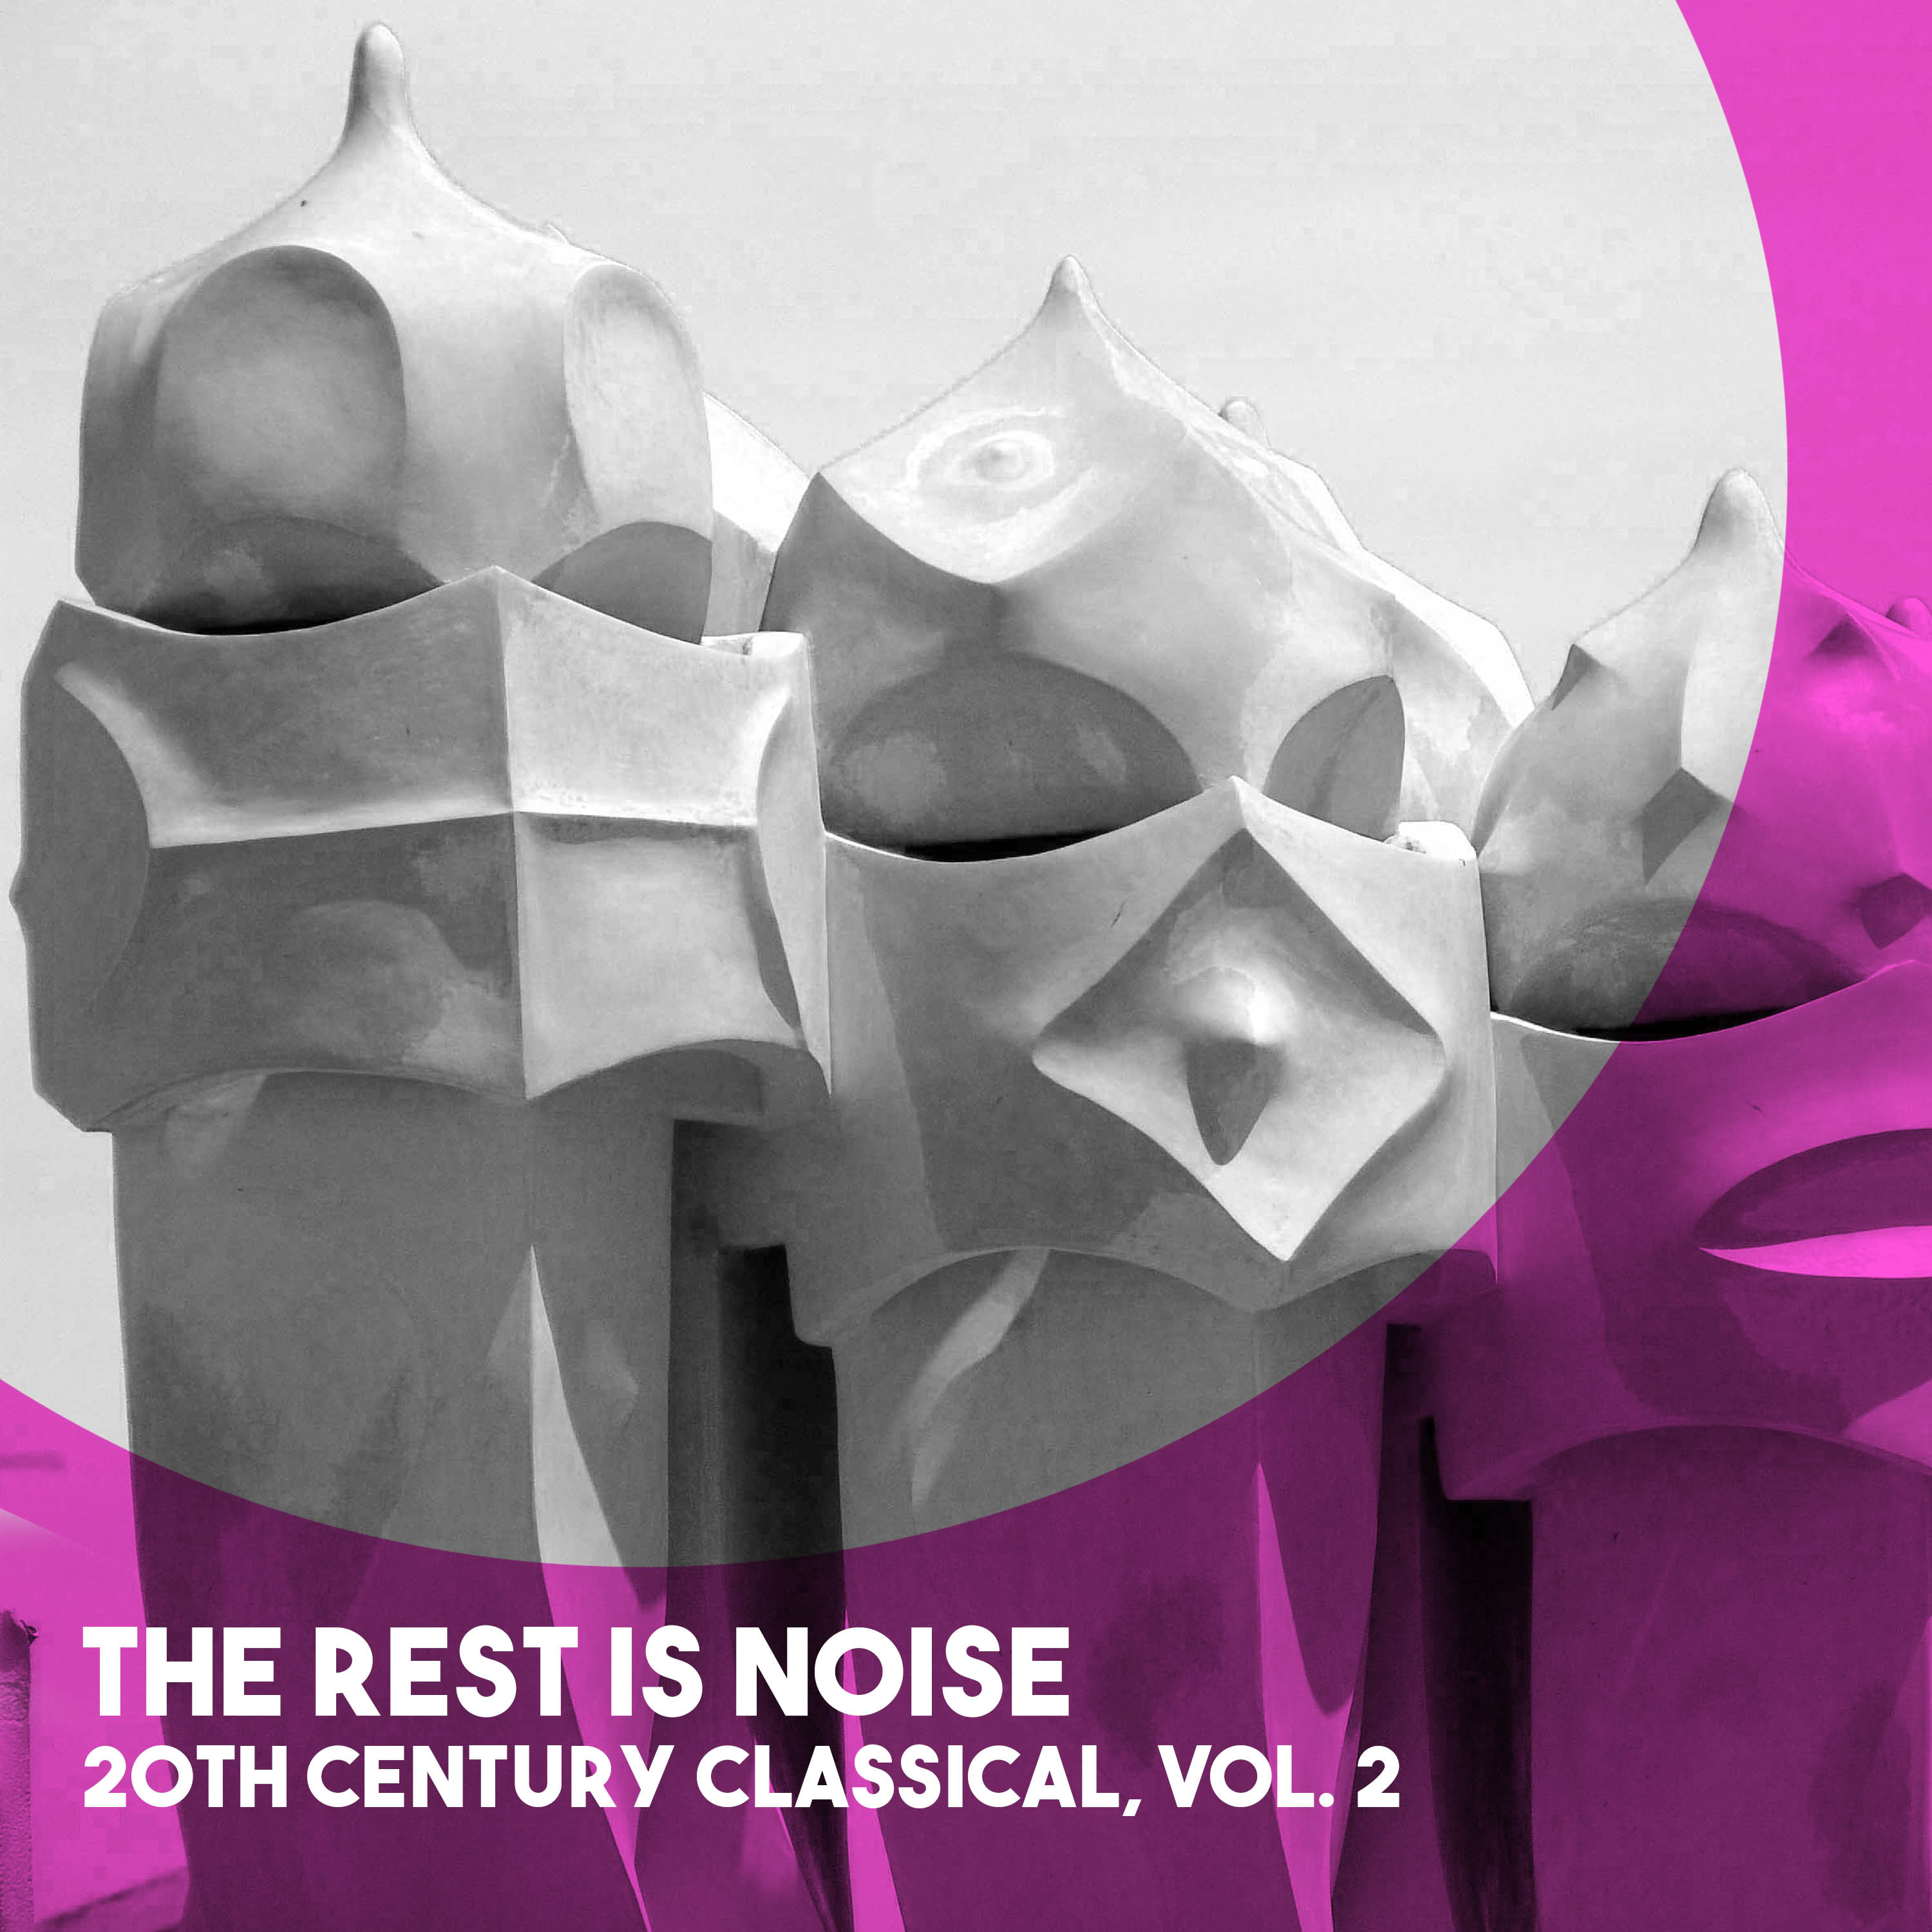 The Rest is Noise: 20th Century Classical, Vol. 2